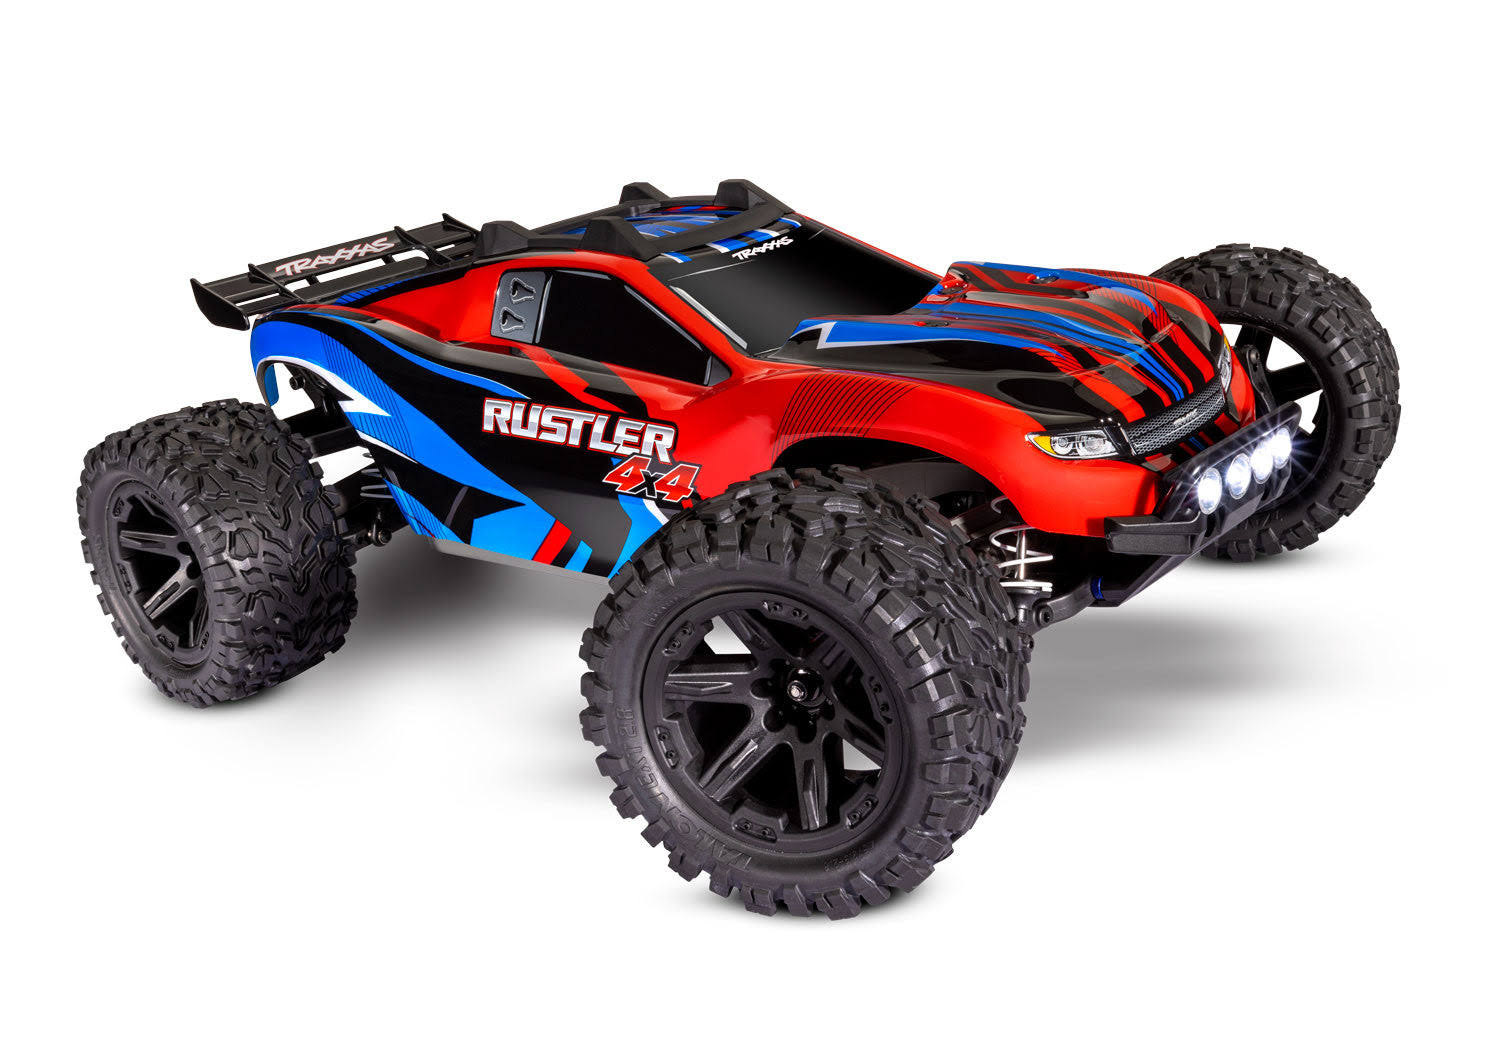 TRAXXAS TRA 67064-61-GRN Rustler 4X4: 1/10-scale 4WD StadiumTruck. Ready-To-Race with TQ 2.4GHz radio system and XL-5 ESC (fwd/rev), and LED lights.